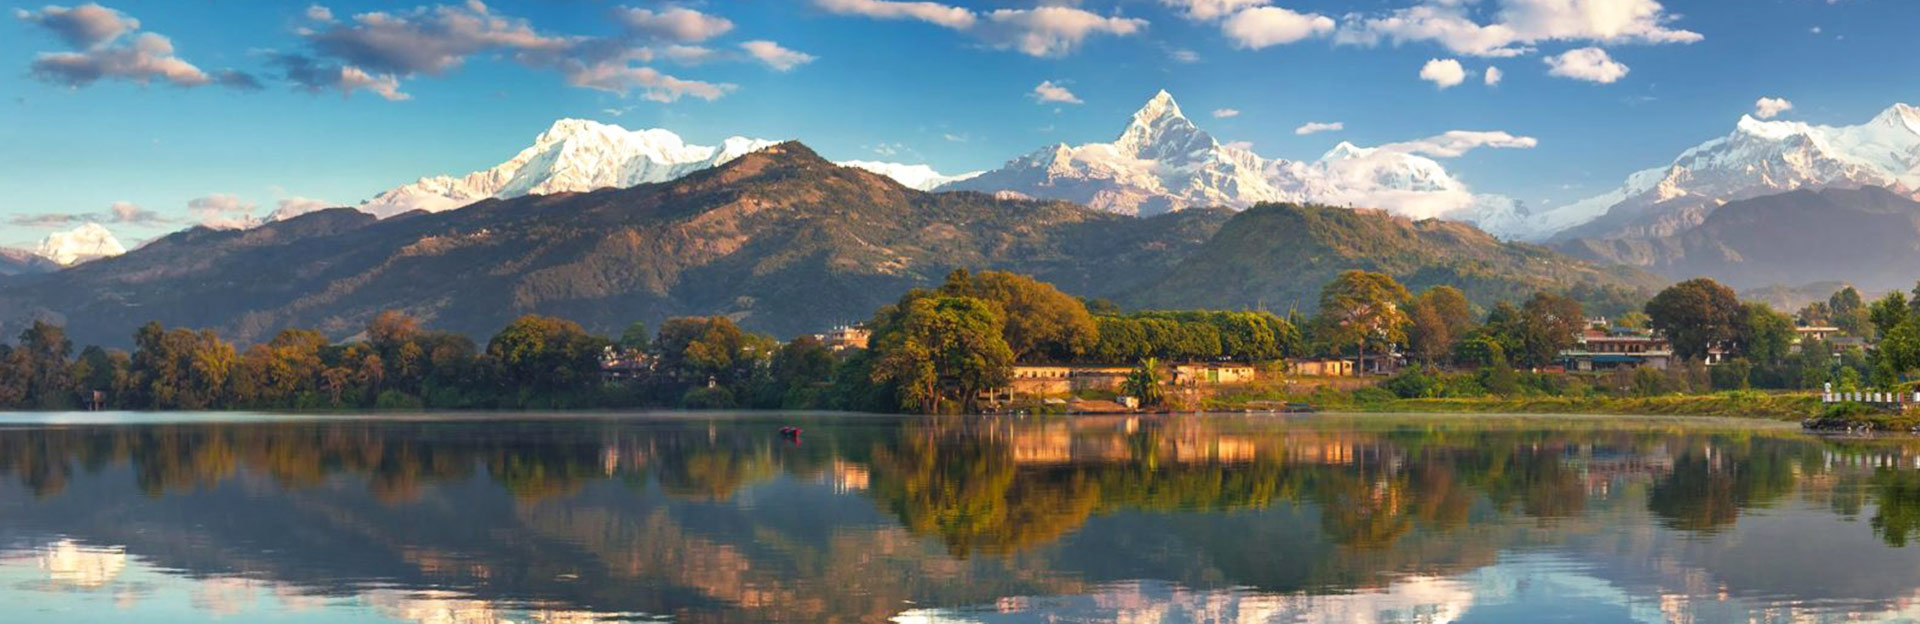 tours to nepal and tibet